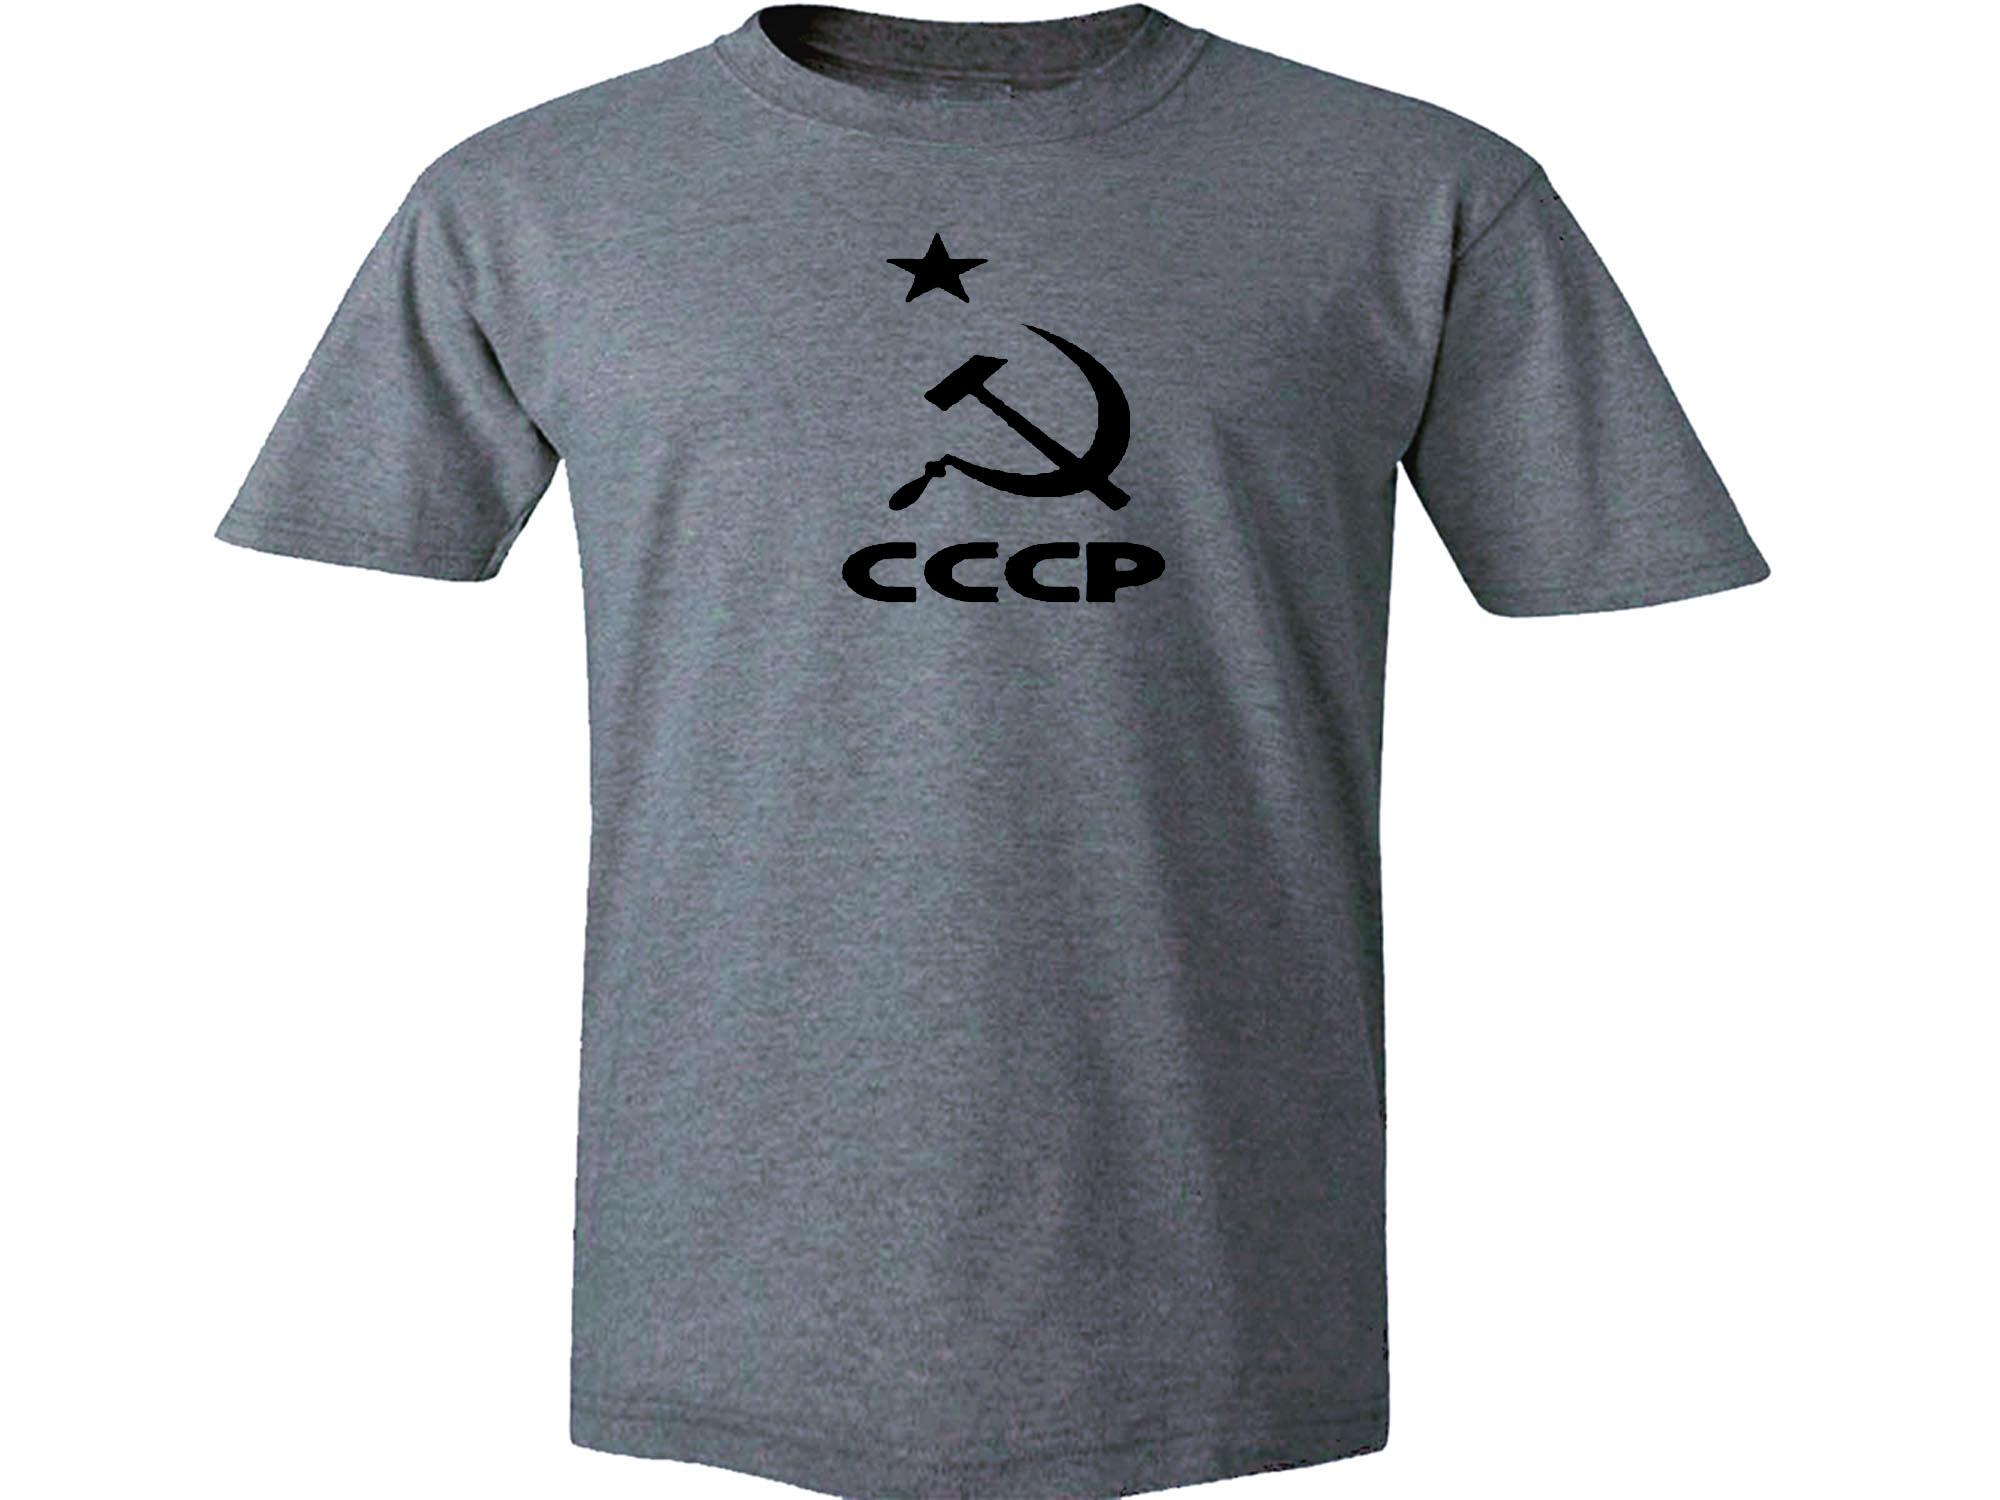 USSR CCCR soviet national symbols - Hammer and sickle gray t-shirt